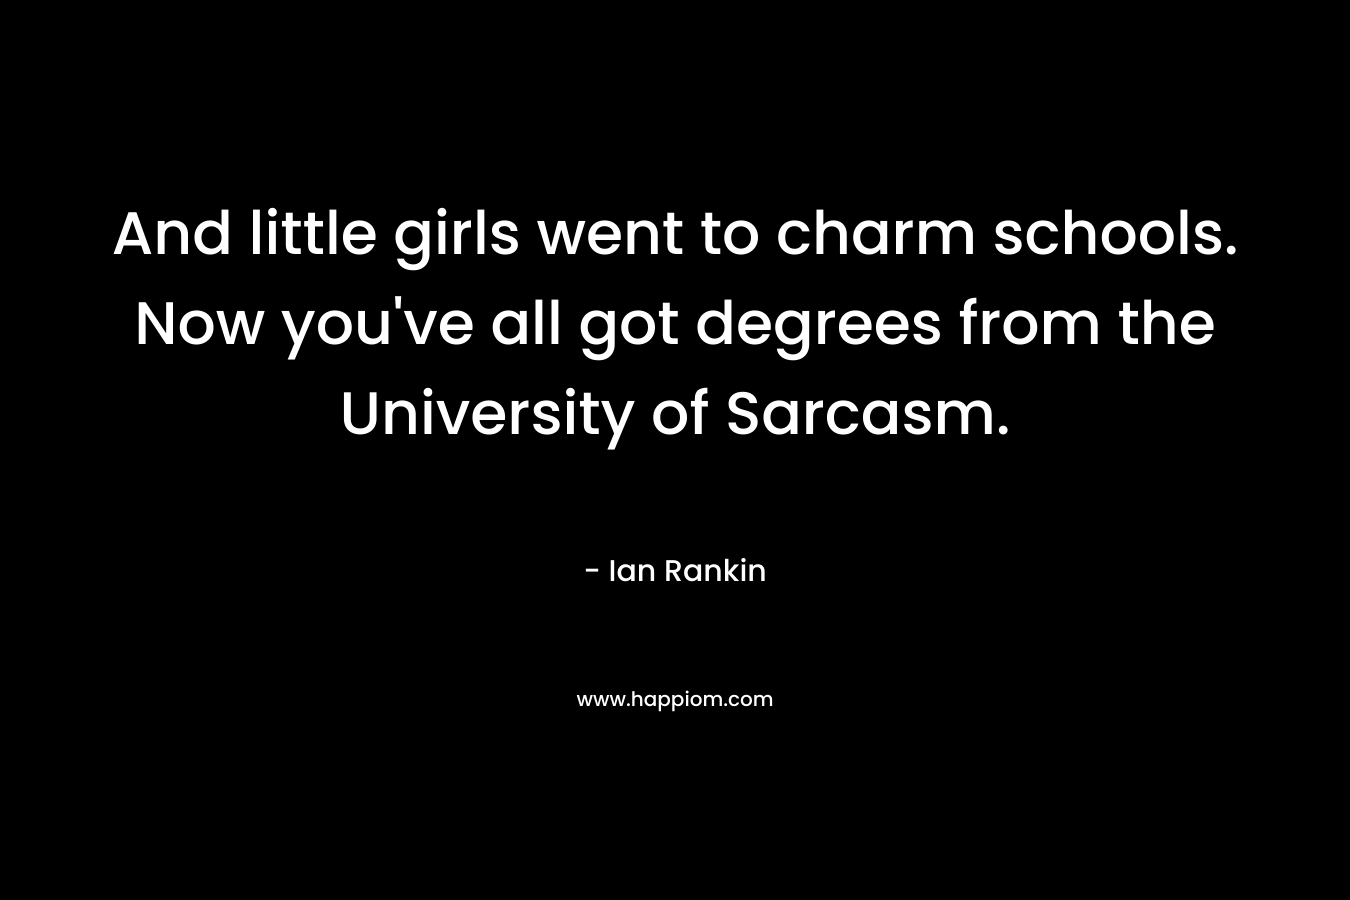 And little girls went to charm schools. Now you've all got degrees from the University of Sarcasm.